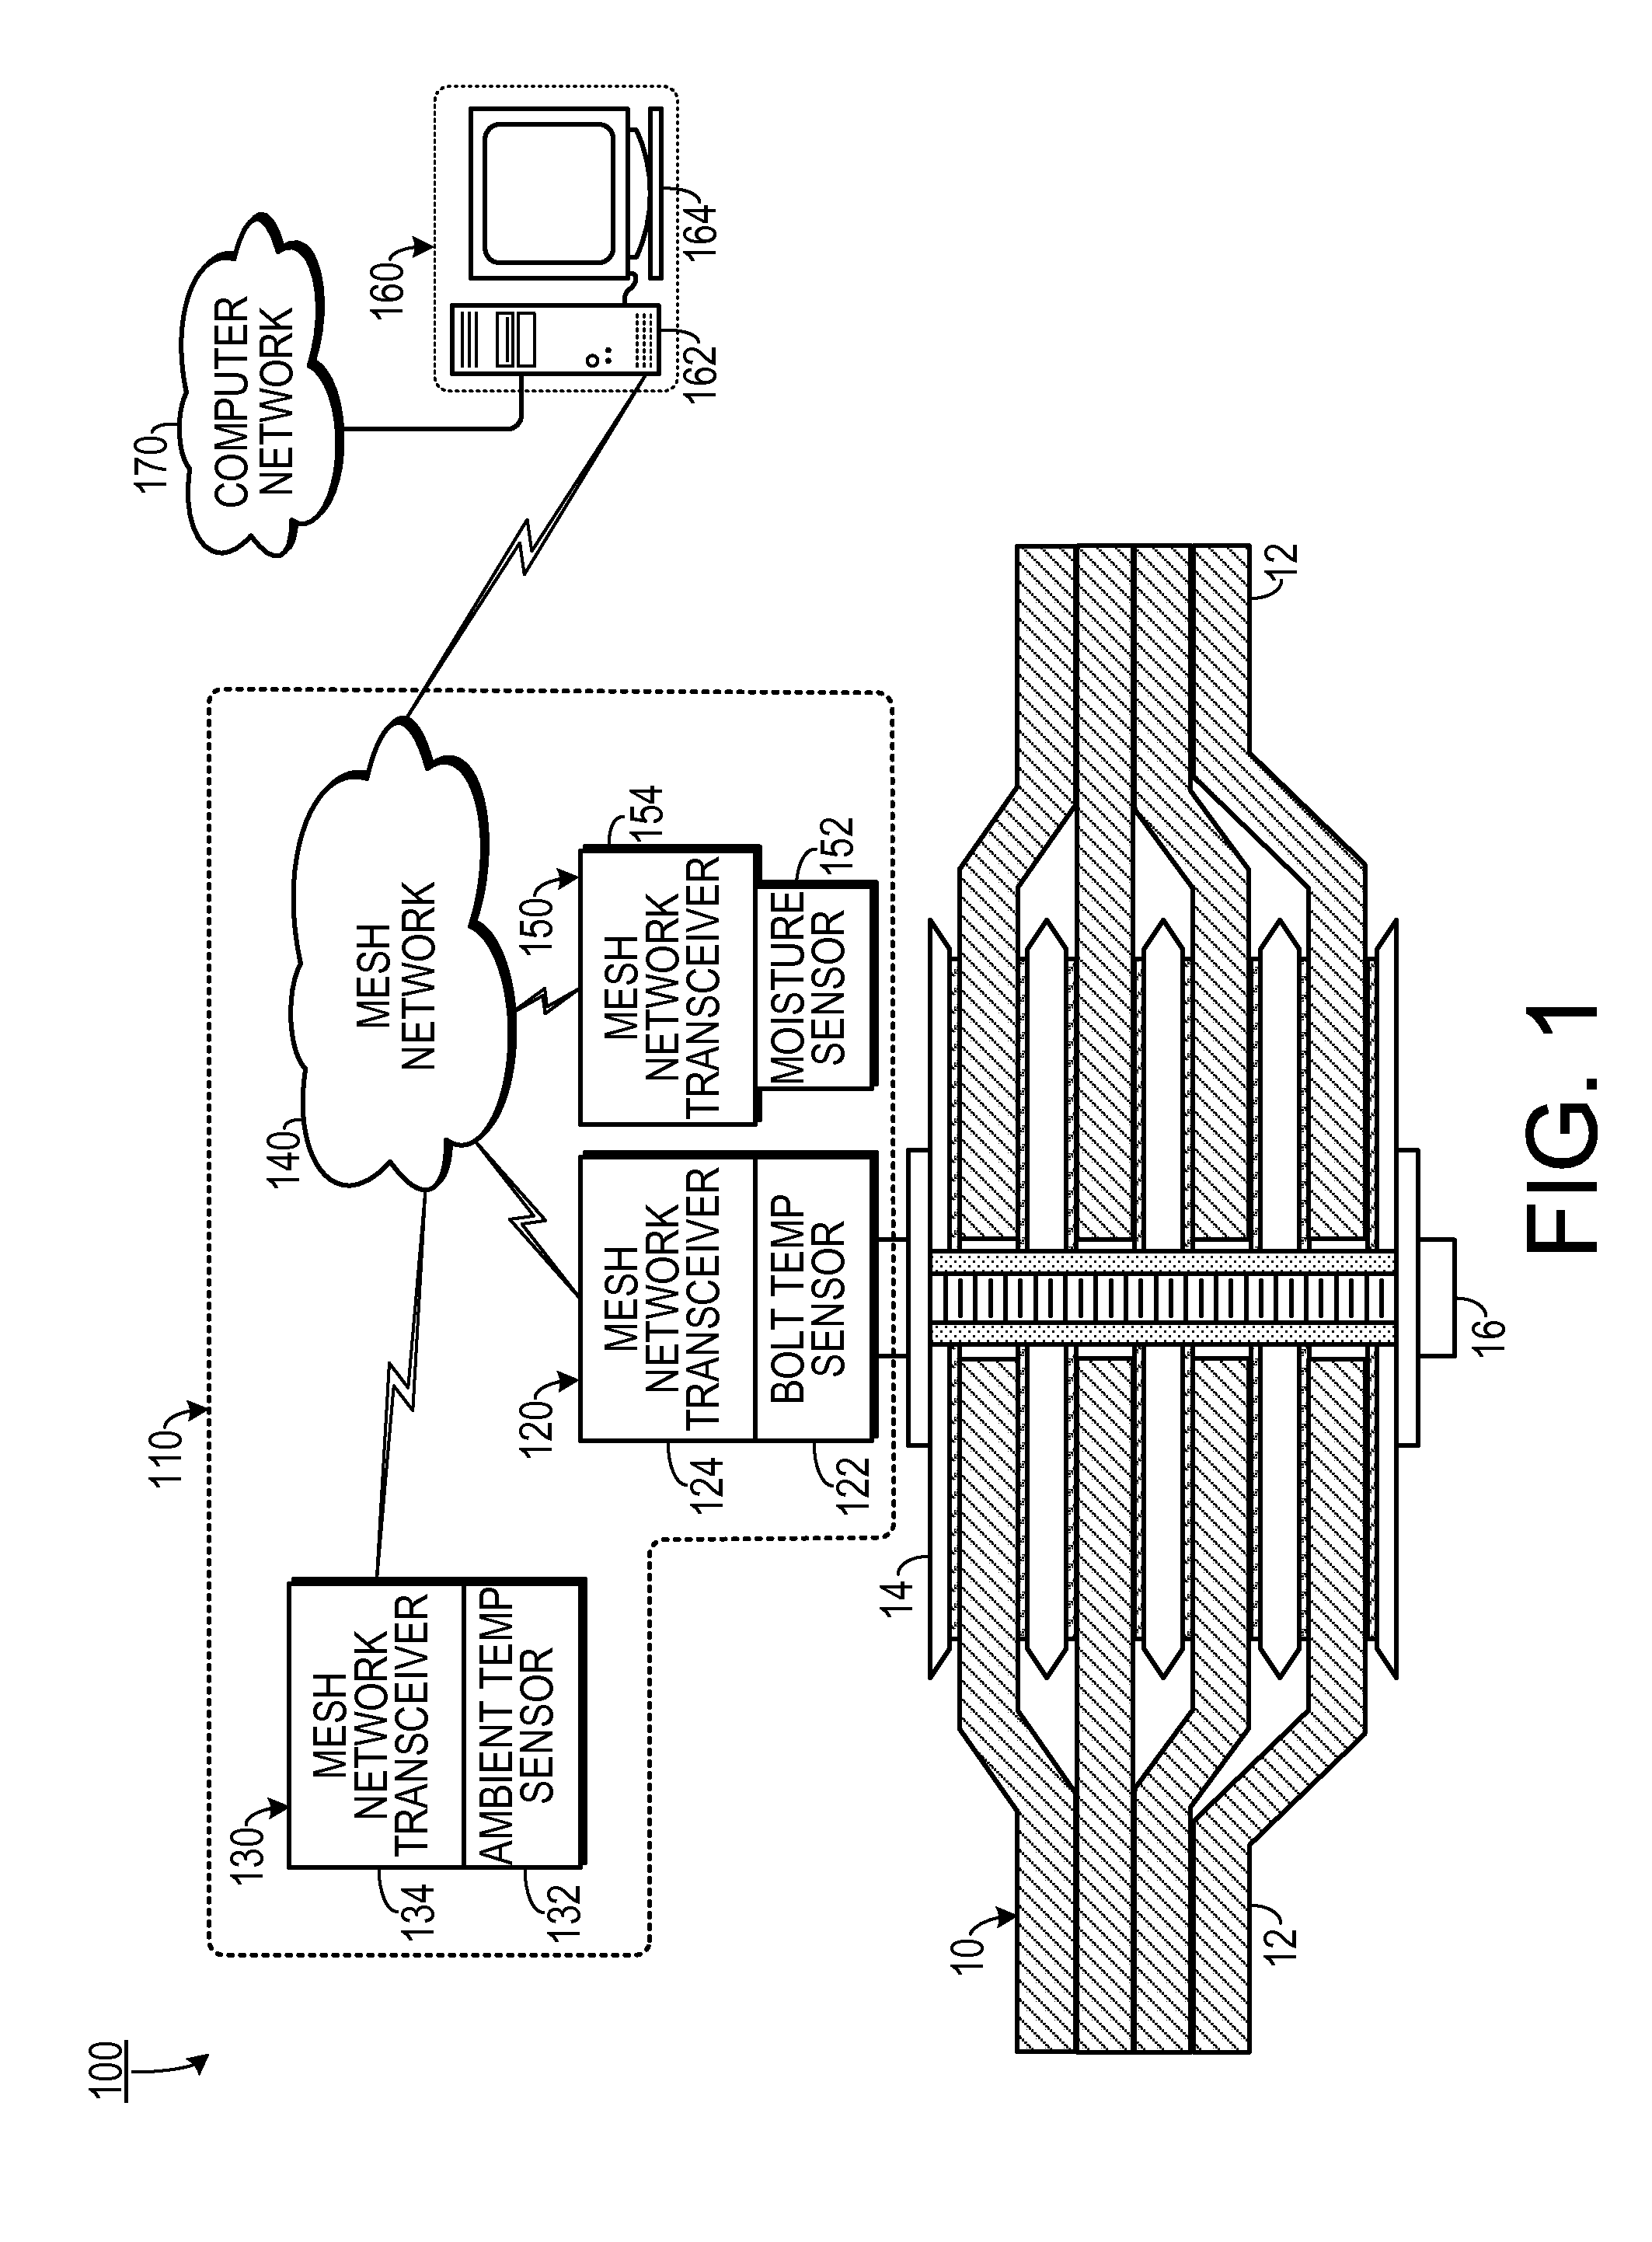 Busway joint parameter detection system